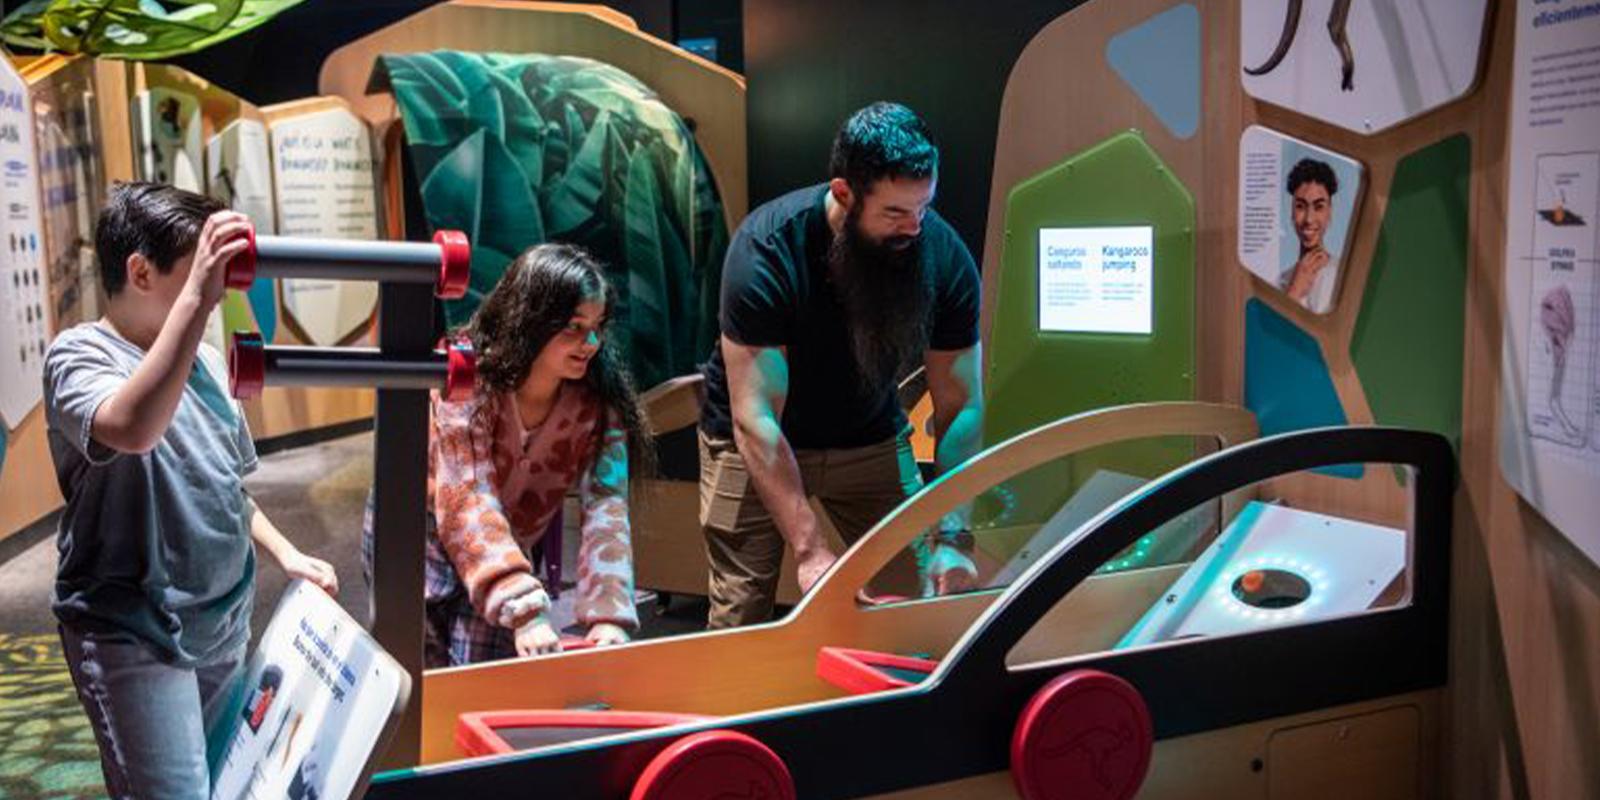 A boy looks at a woman and man interacting with a science exhibit shaped like a car